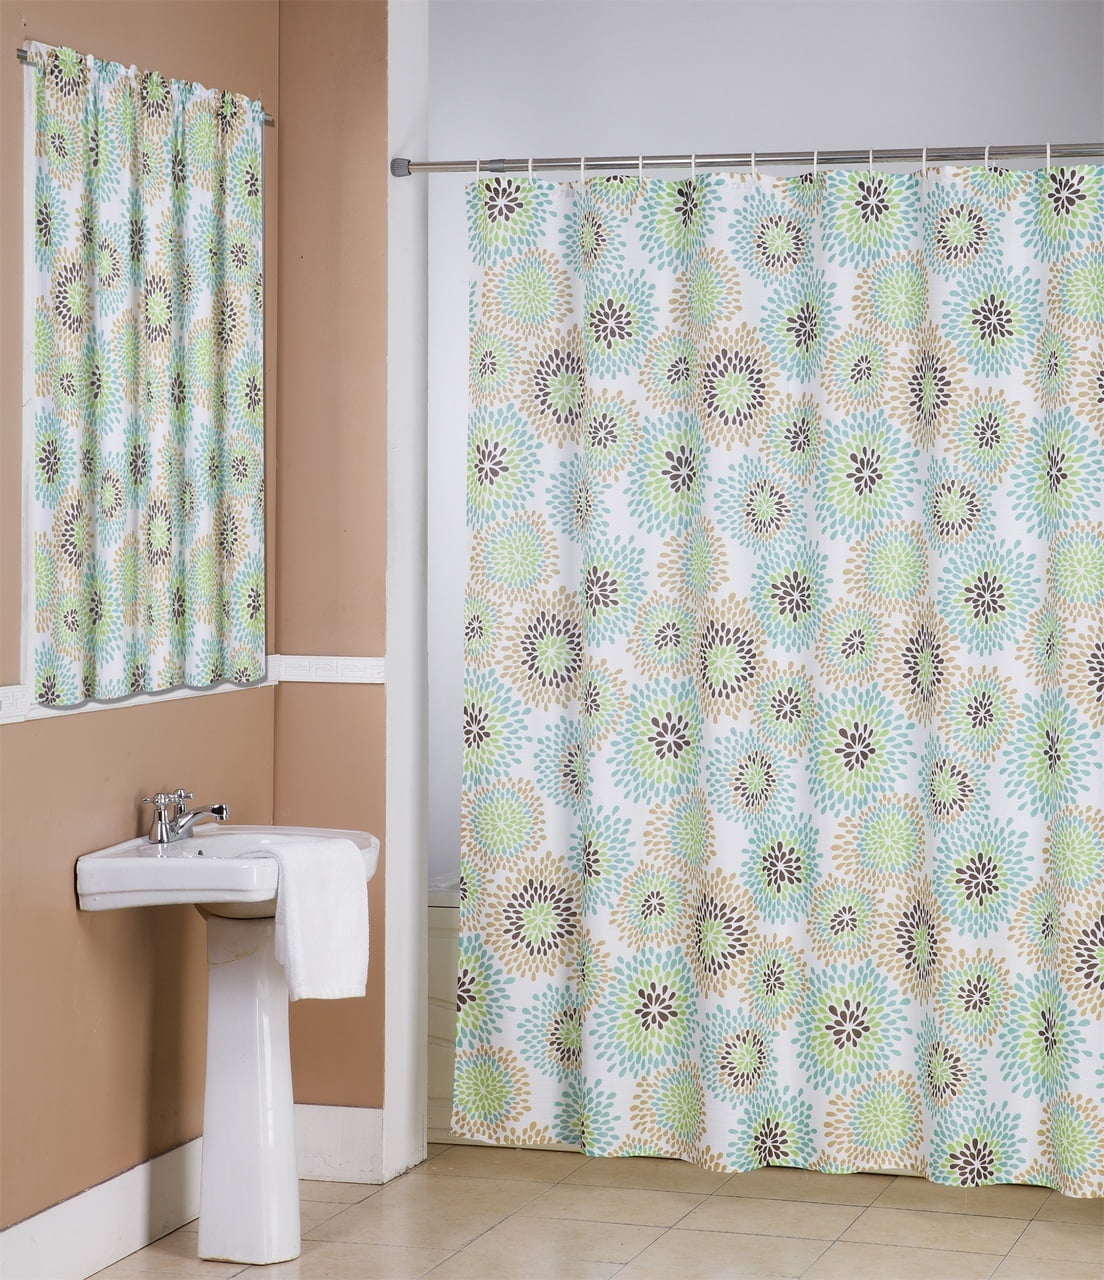 Shower Curtain Sets With Window Curtains : Shower Curtains With ...